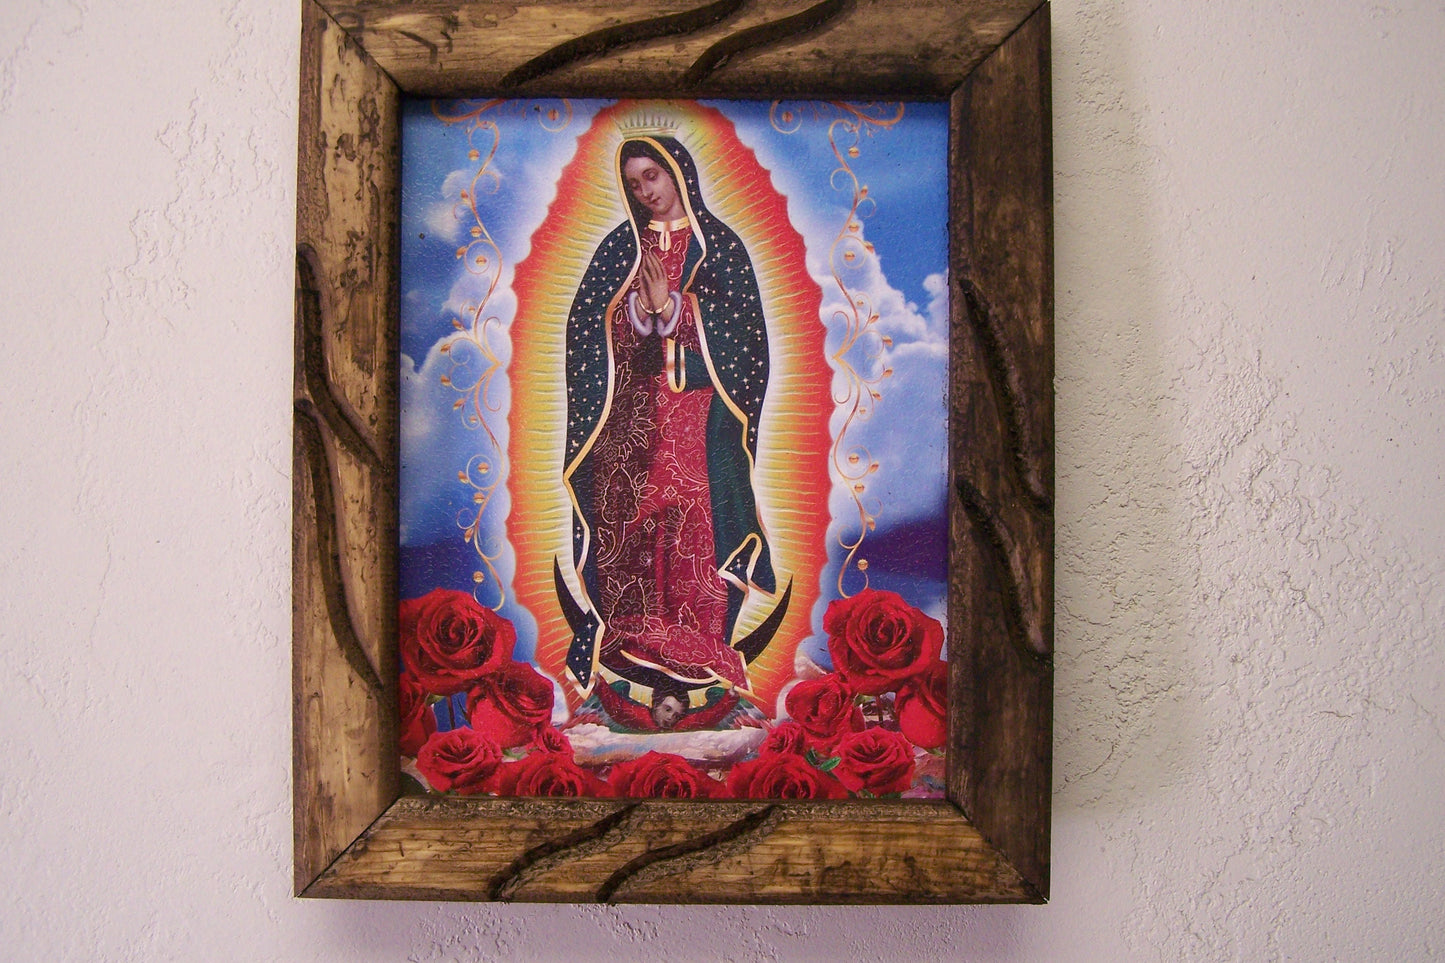 9.5" x 12" Framed Giclee Print - Virgin of Guadalupe with Roses - Mexico